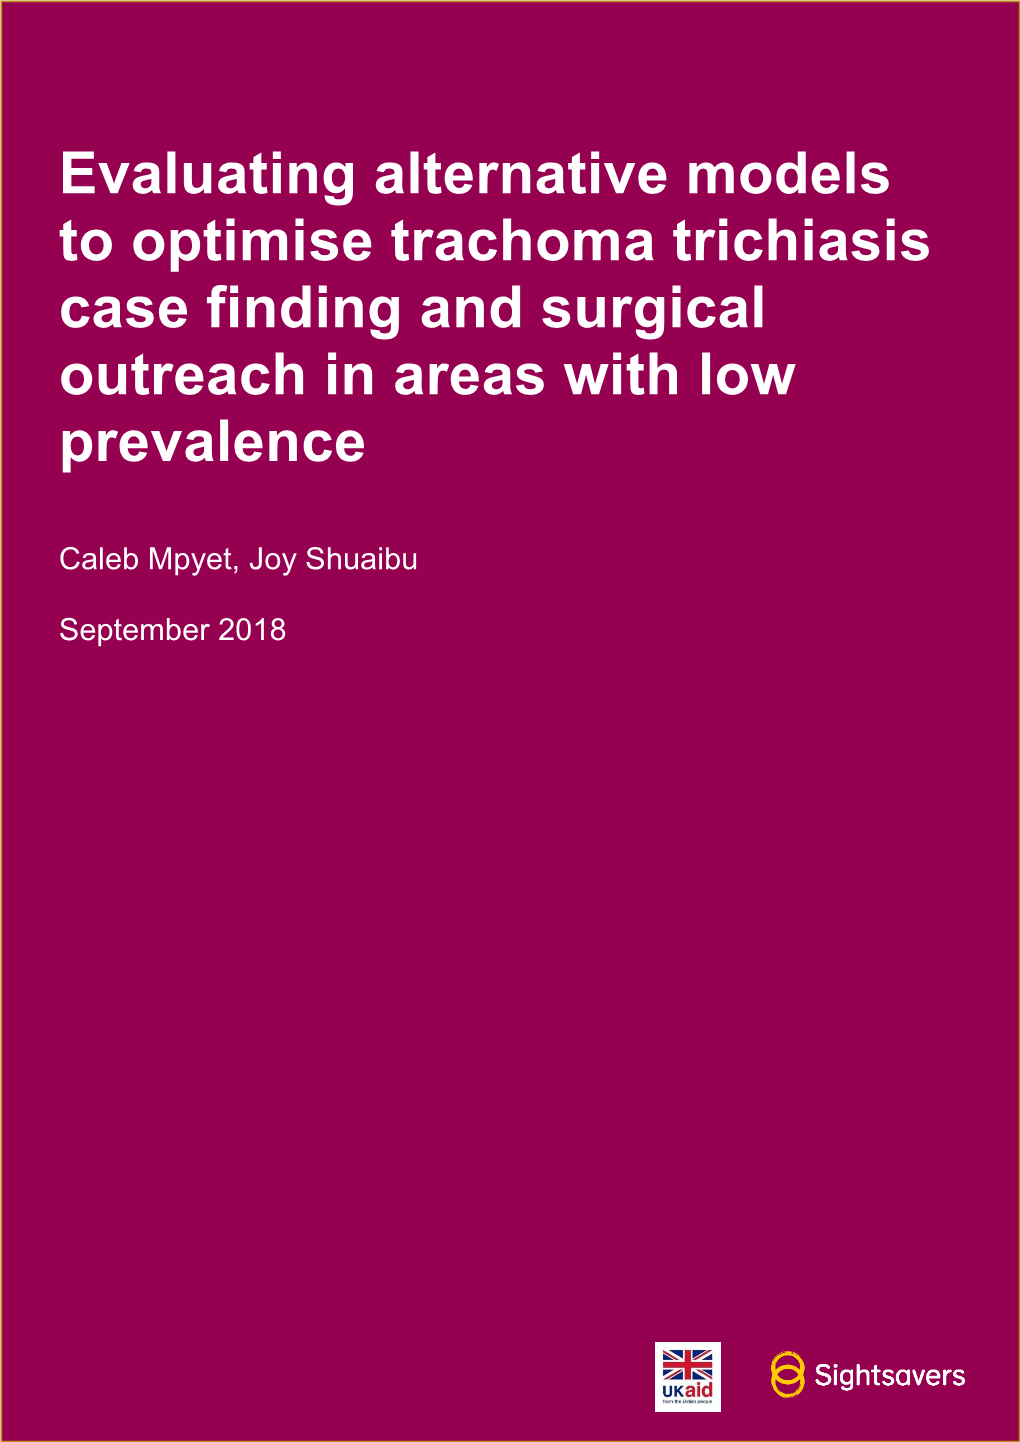 Evaluating Alternative Models to Optimise Trachoma Trichiasis Case Finding and Surgical Outreach in Areas with Low Prevalence